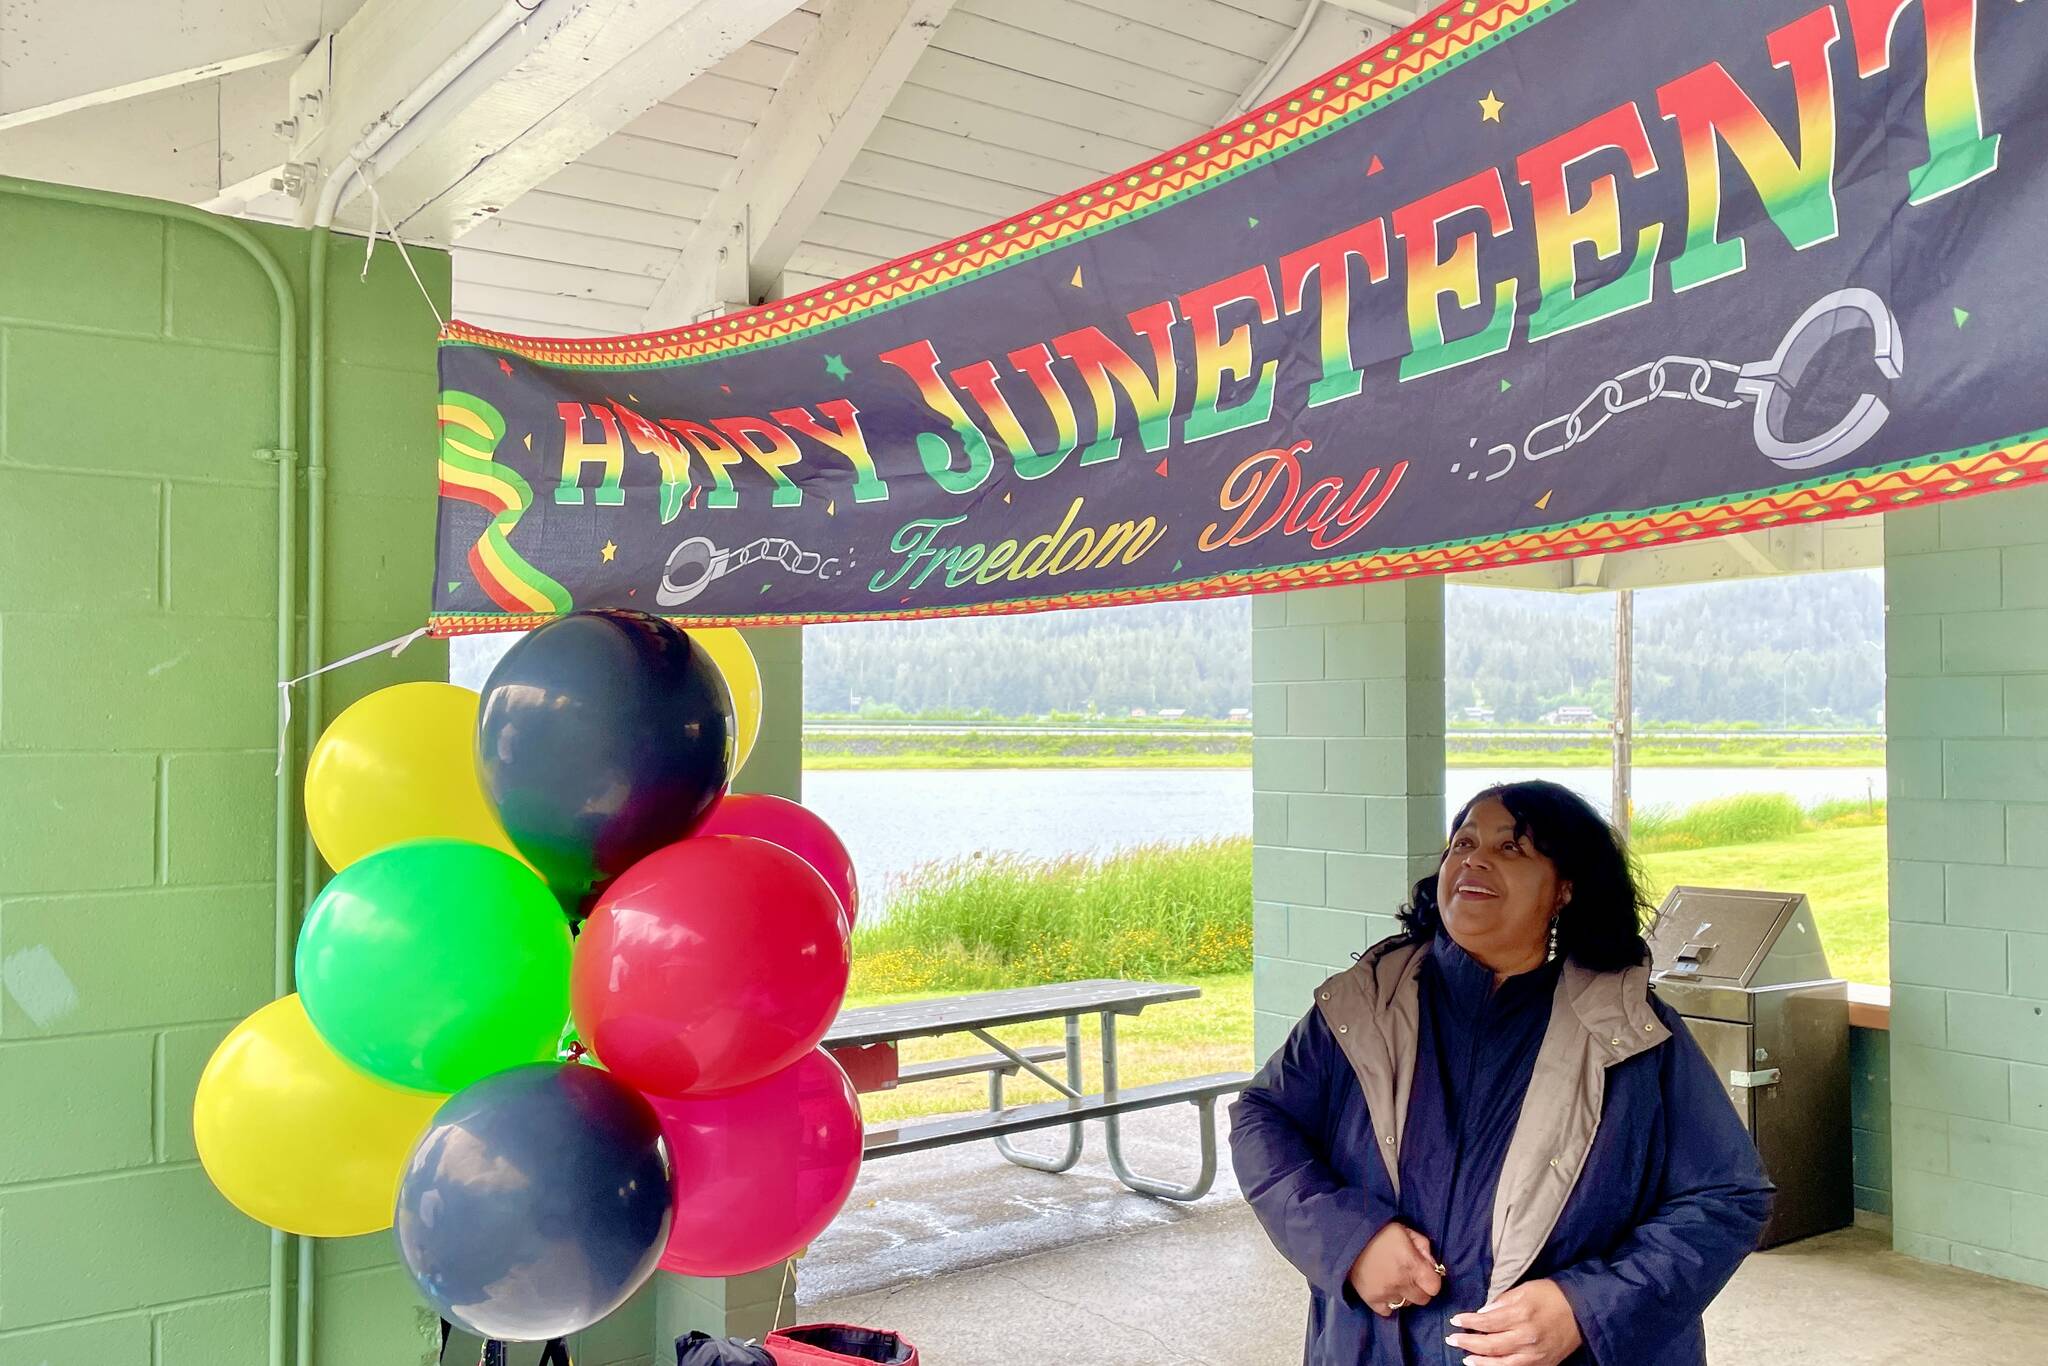 Sherry Patterson, president of the Black Awareness Association in Juneau, looks out as the group sold sweet potato pies as a fundraiser for a college scholarship fund during a Juneteenth celebration on June 19, 2022. (Michael S. Lockett / Juneau Empire)